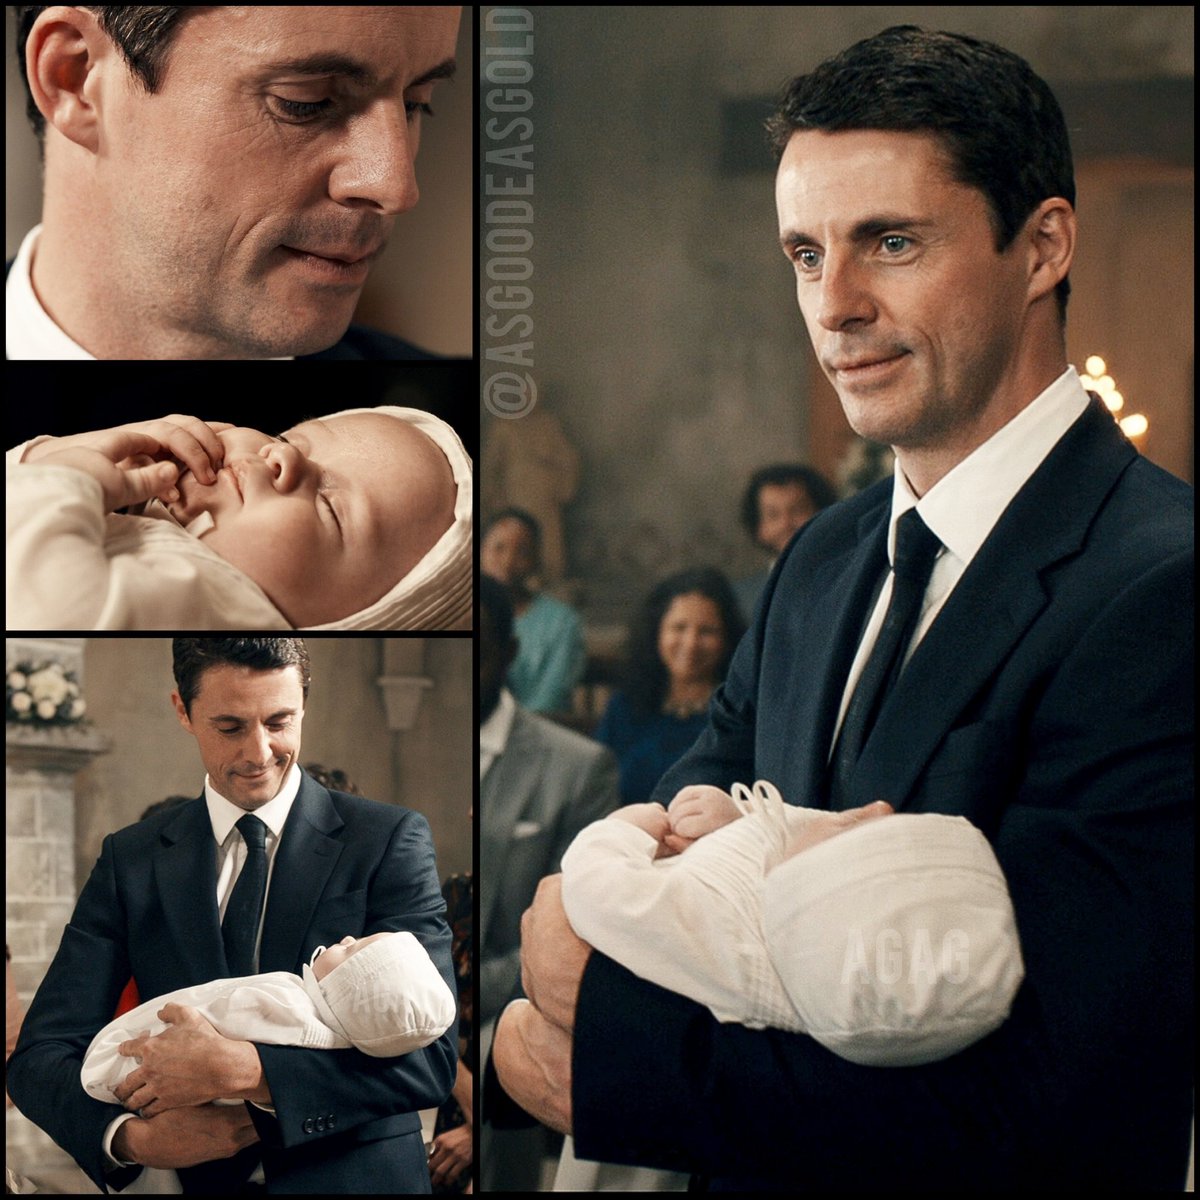 On this Father's Day, Matthew de Clermont holding one of the babeeeez (Rebecca) at the christening. Aw, heart-melty.
More dad cuteness/hotness in GIF ⬇️
#matthewgoode #adow
📷 A Discovery of Witches (2022) s3:05 my edit